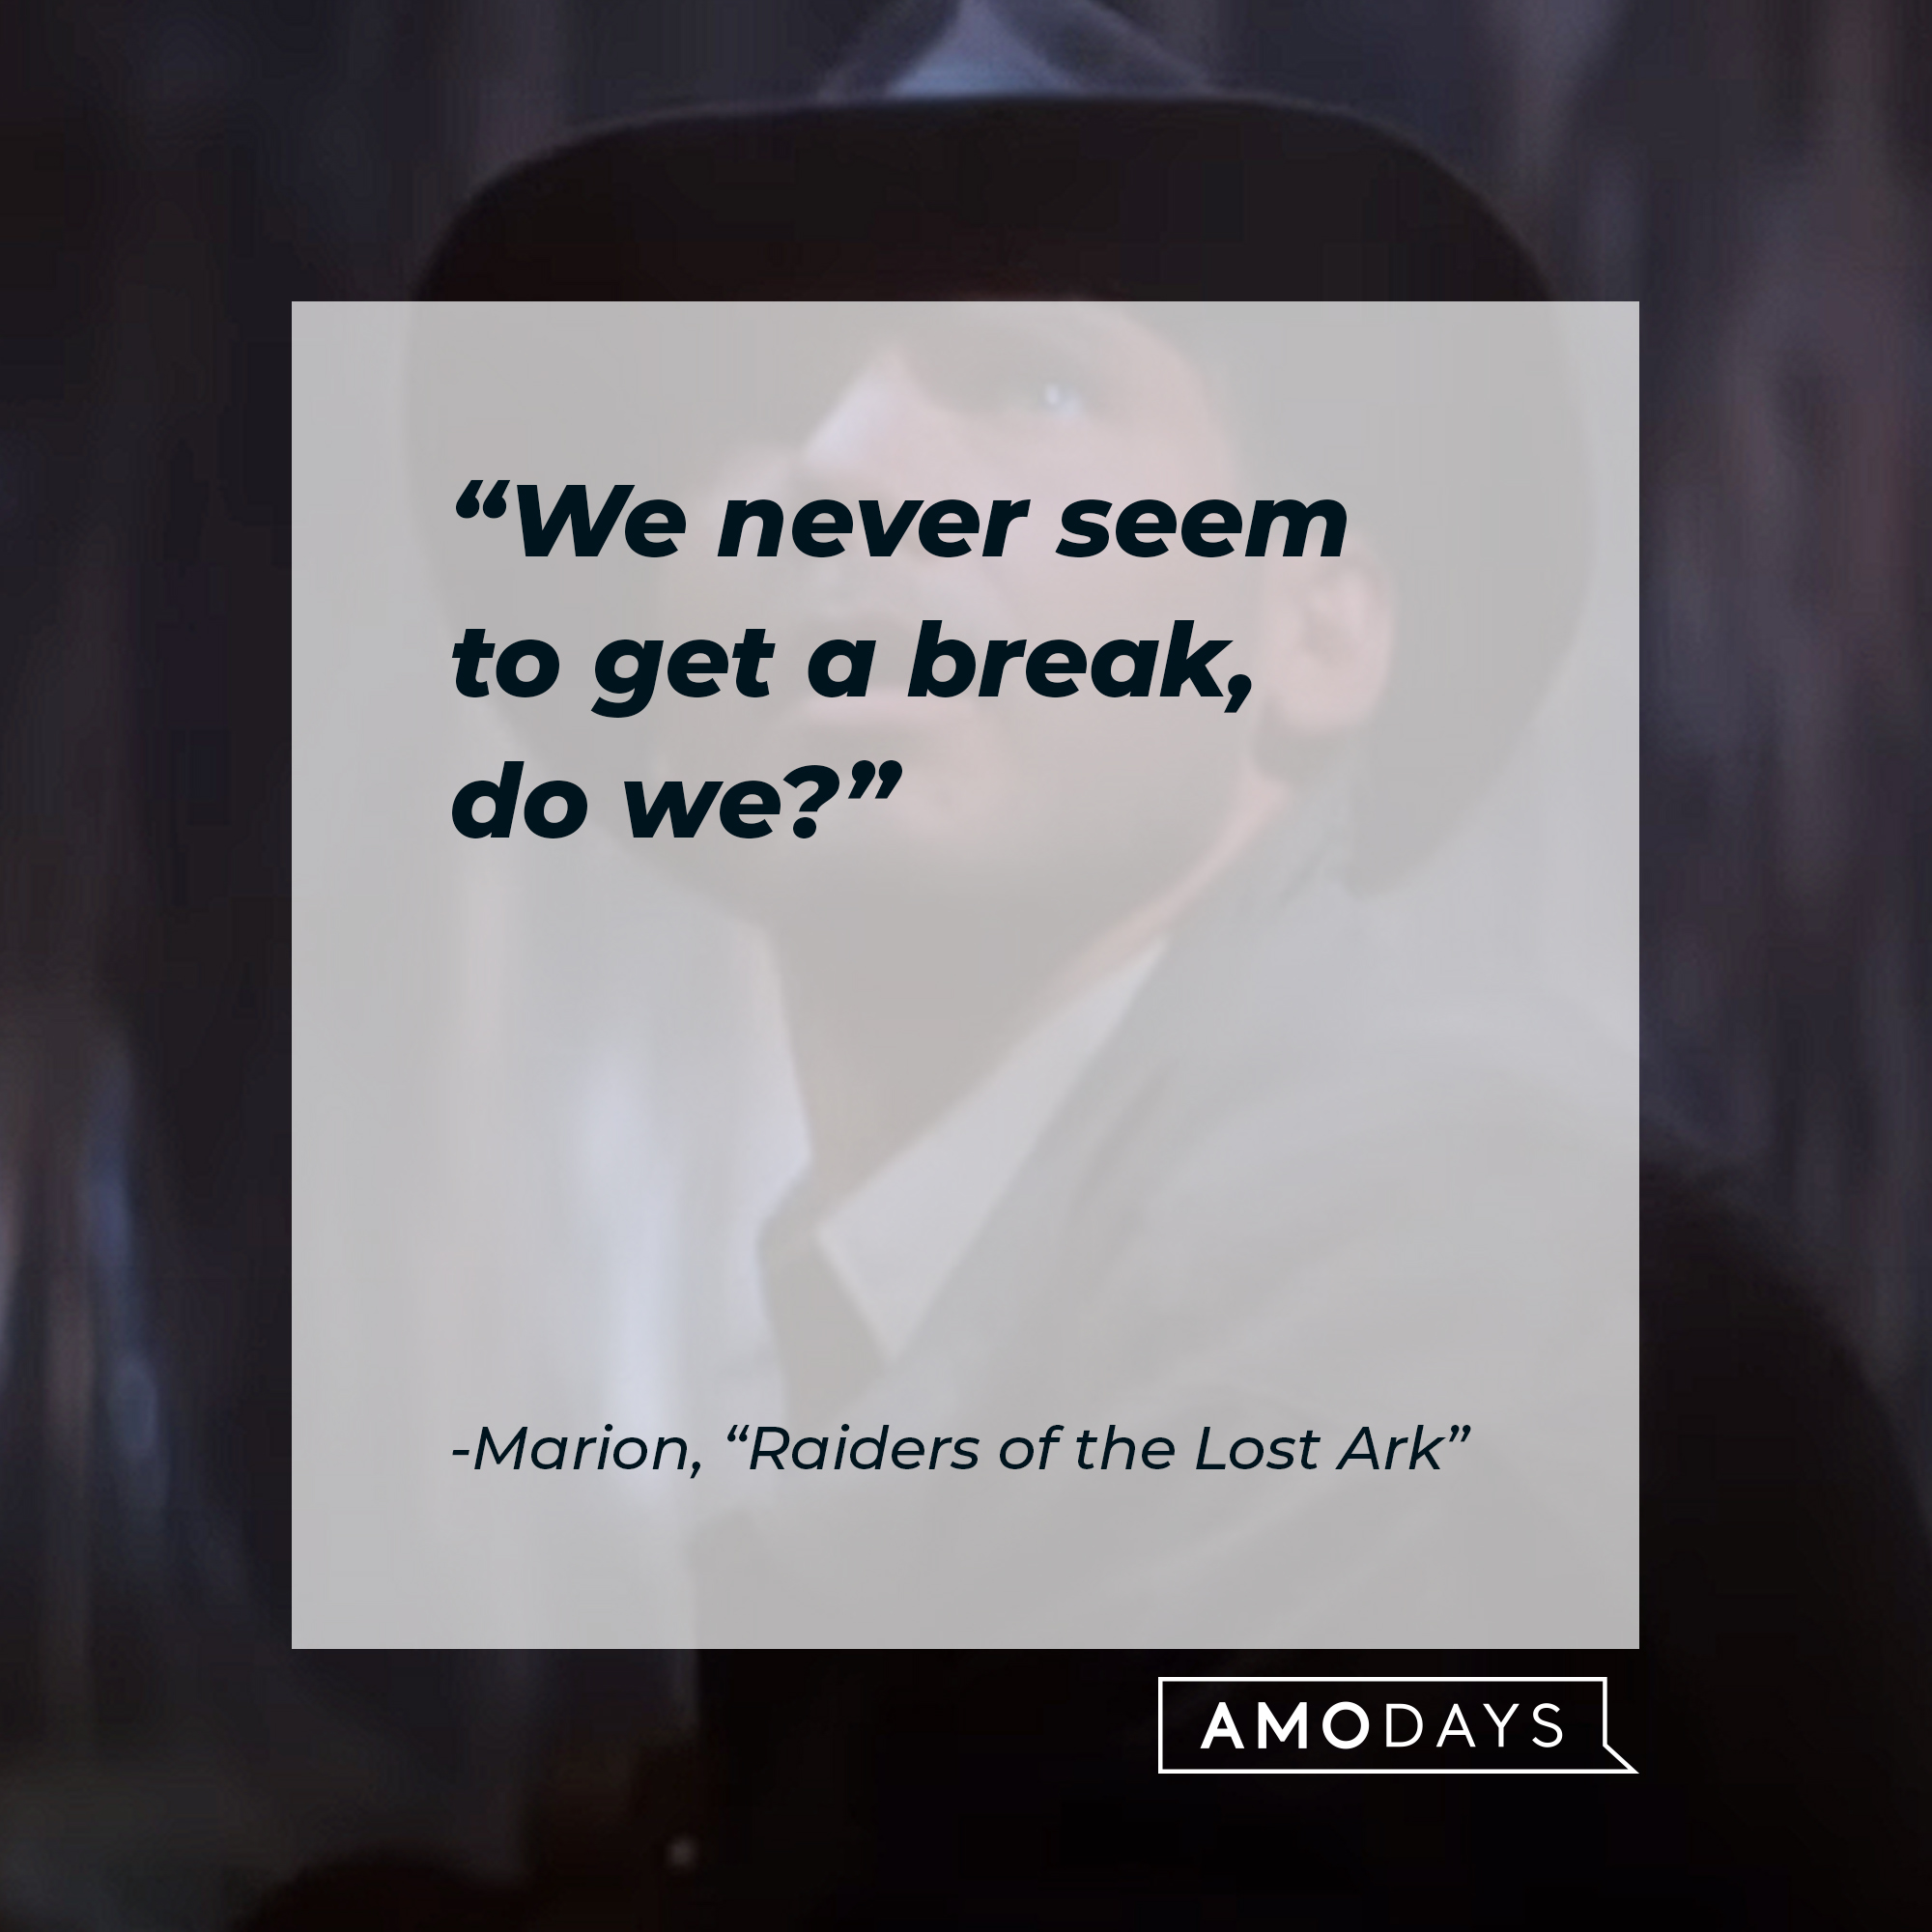 A photo of Indiana Jones with the quote, "We never seem to get a break, do we?" | Source: YouTube/paramountmovies